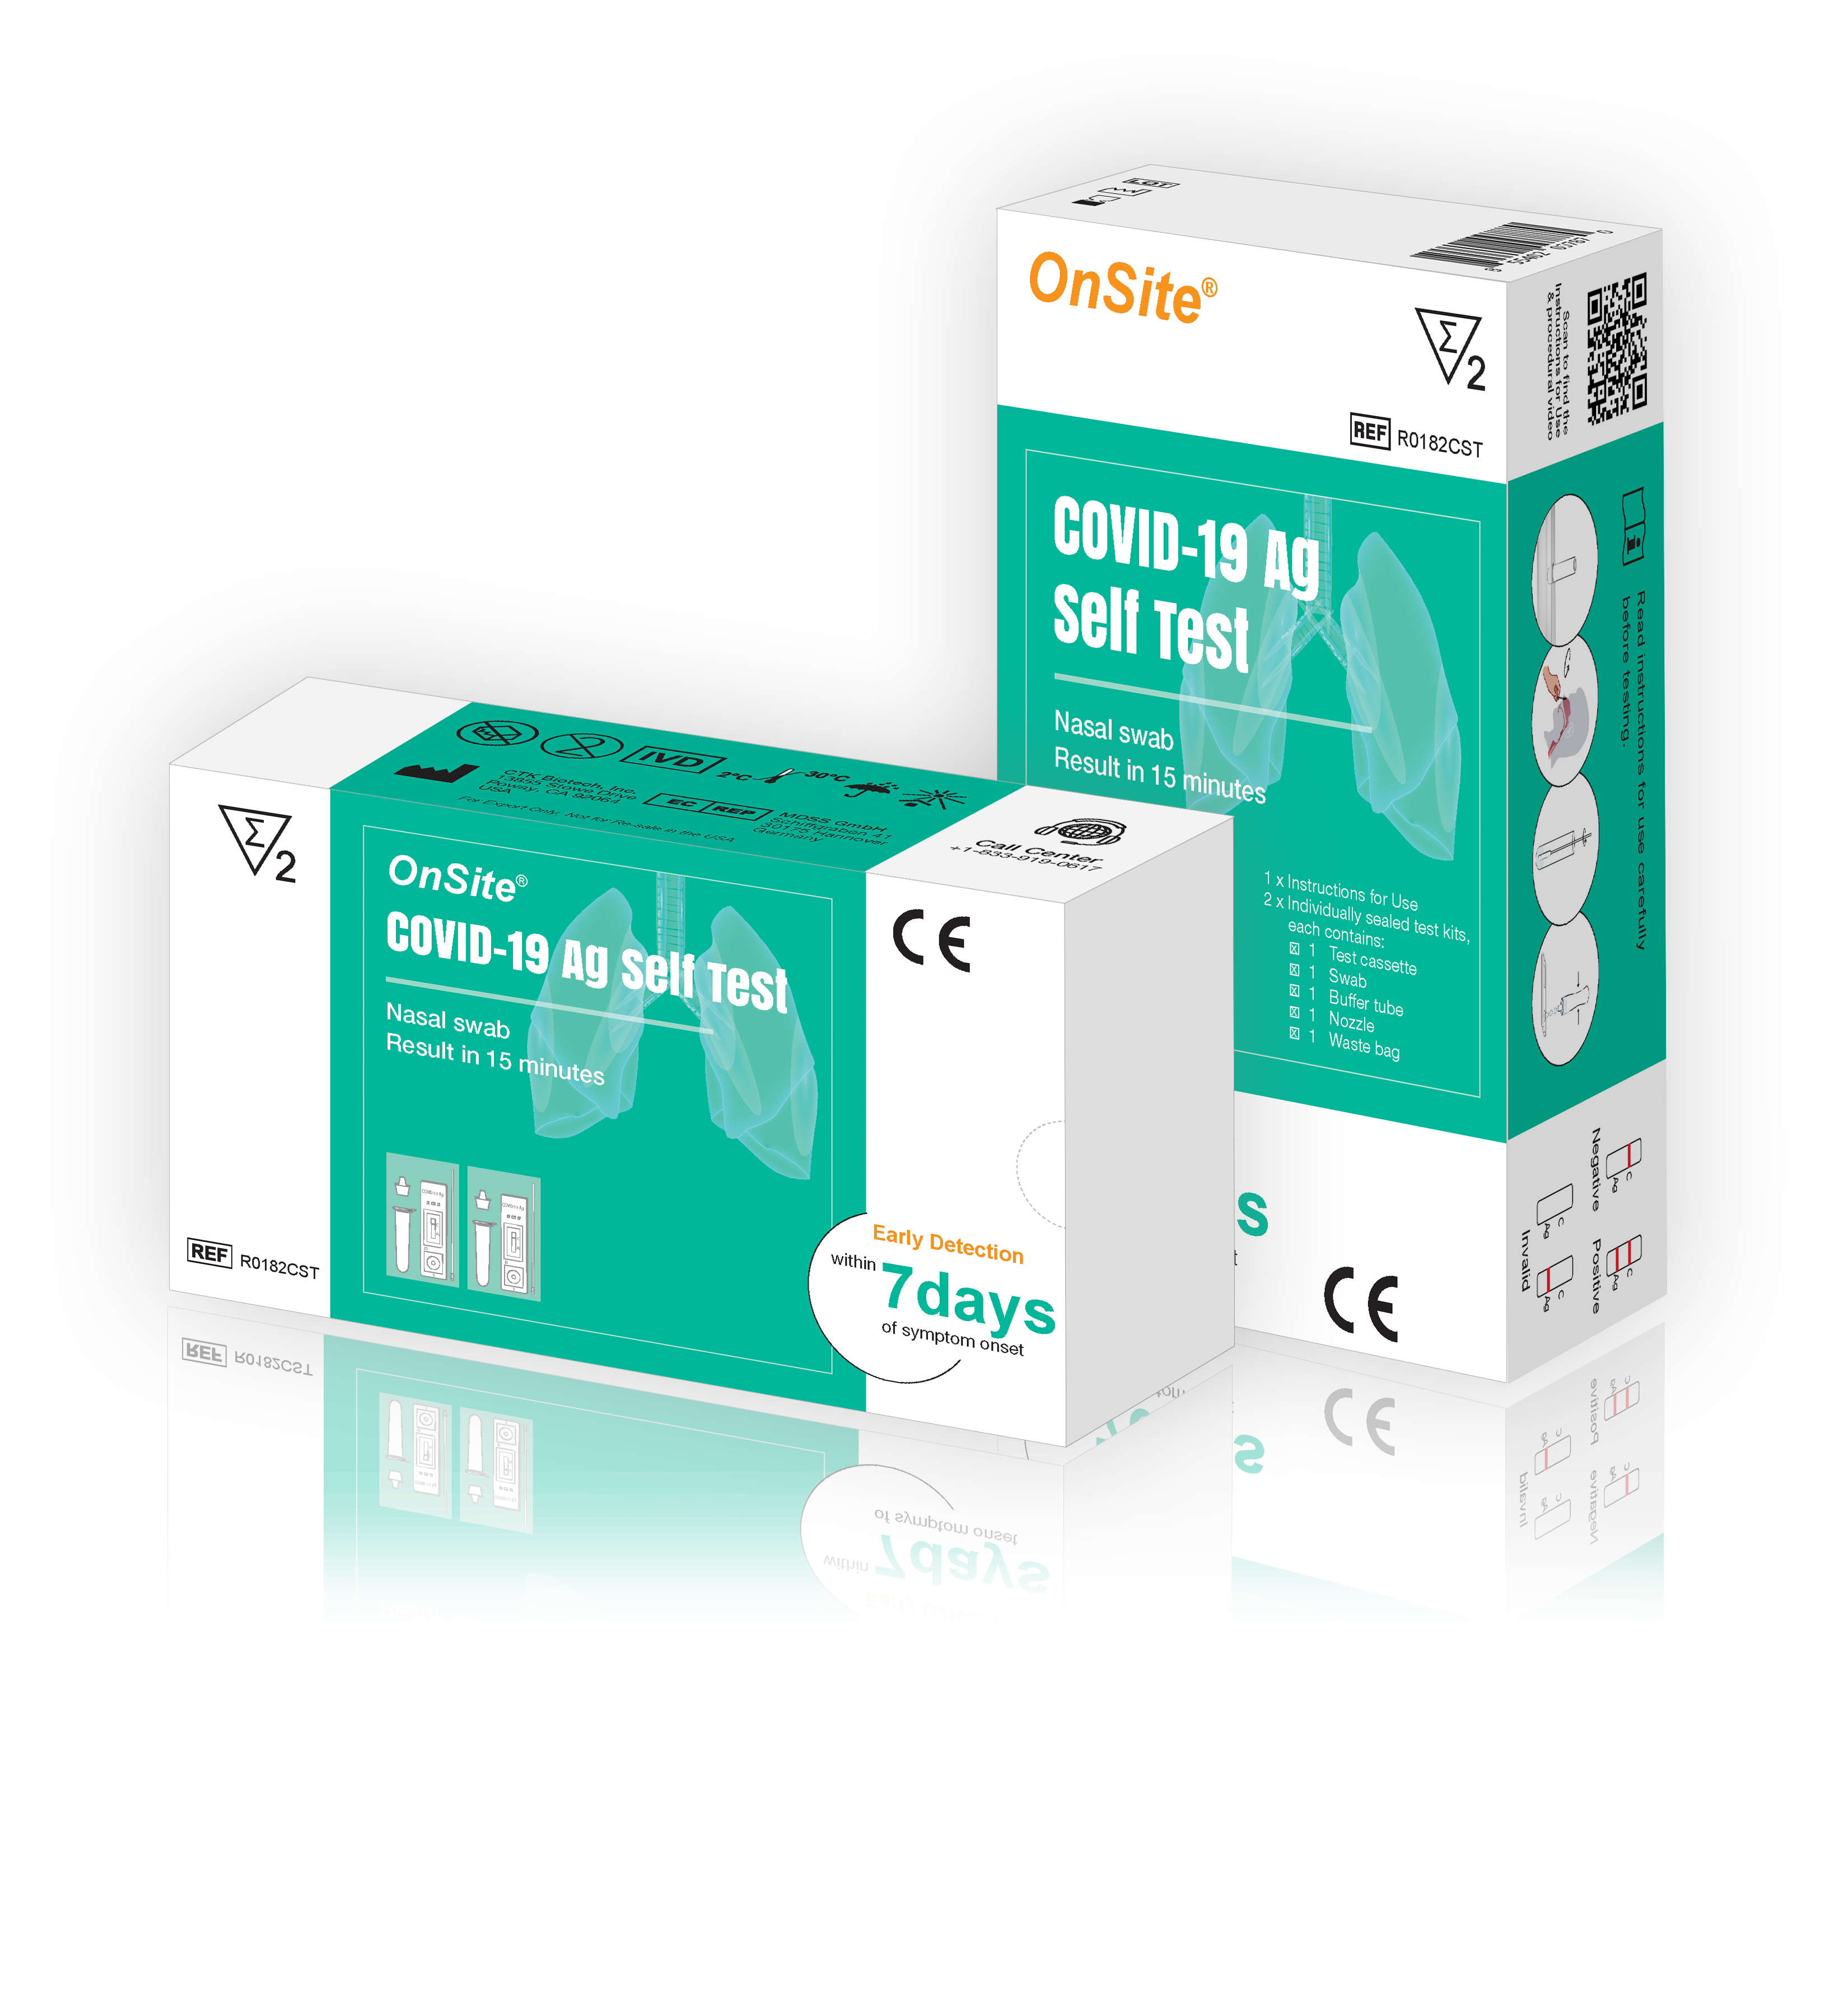 COVID-19 Ag Self Test – CE Marked (2 Pack)